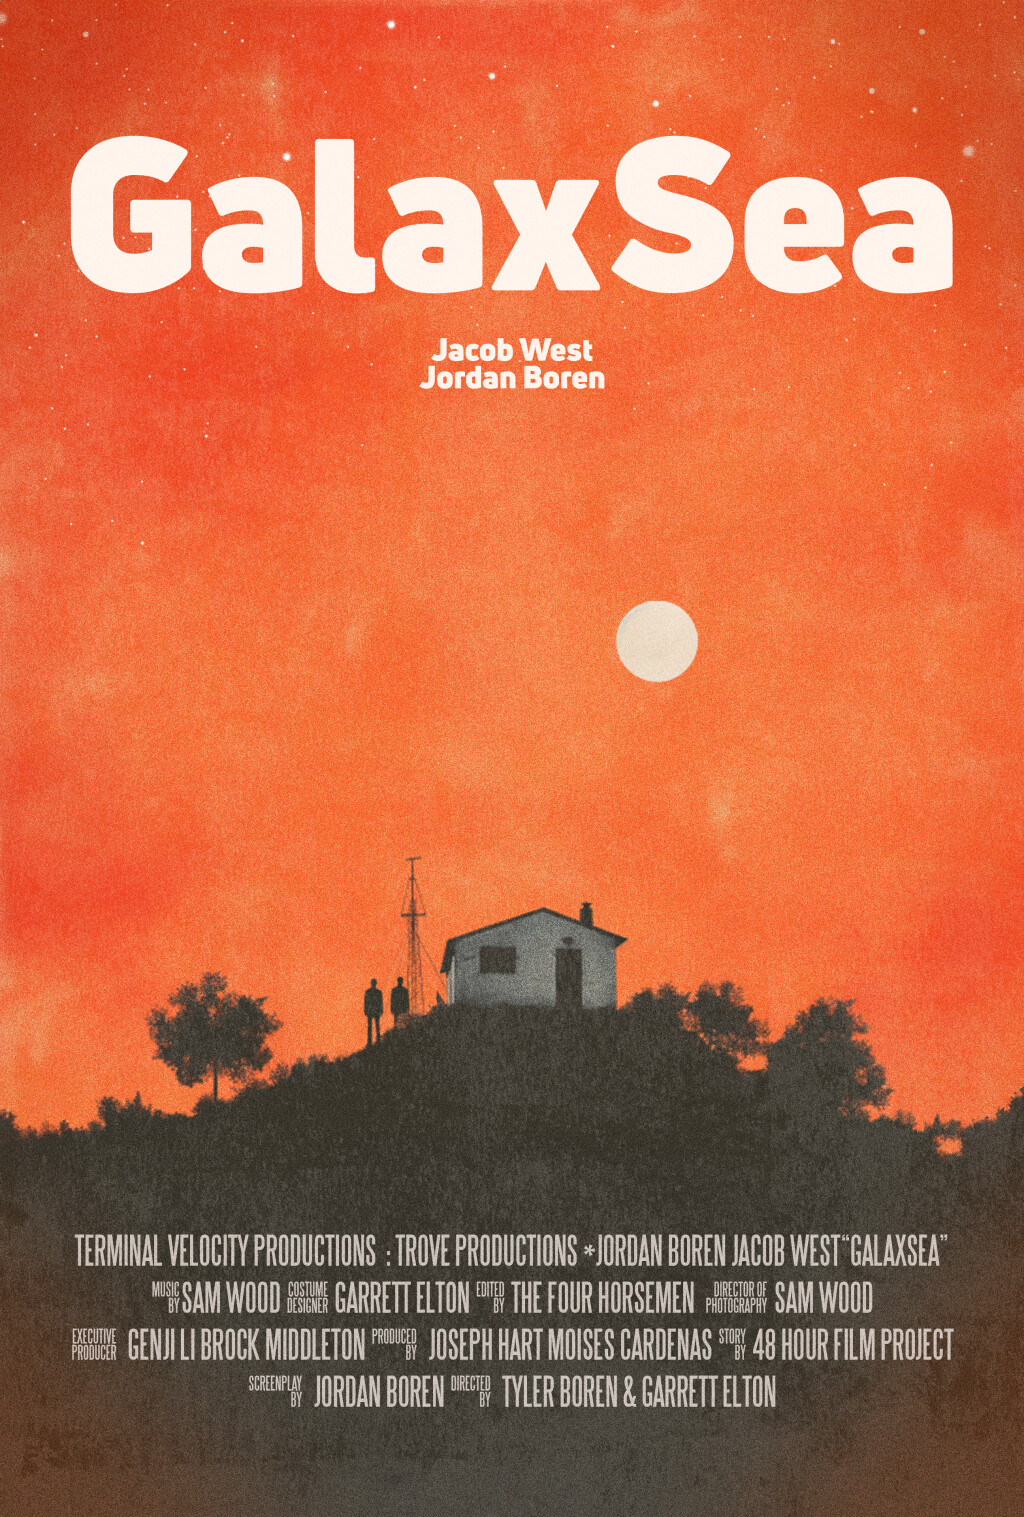 Filmposter for GalaxSea